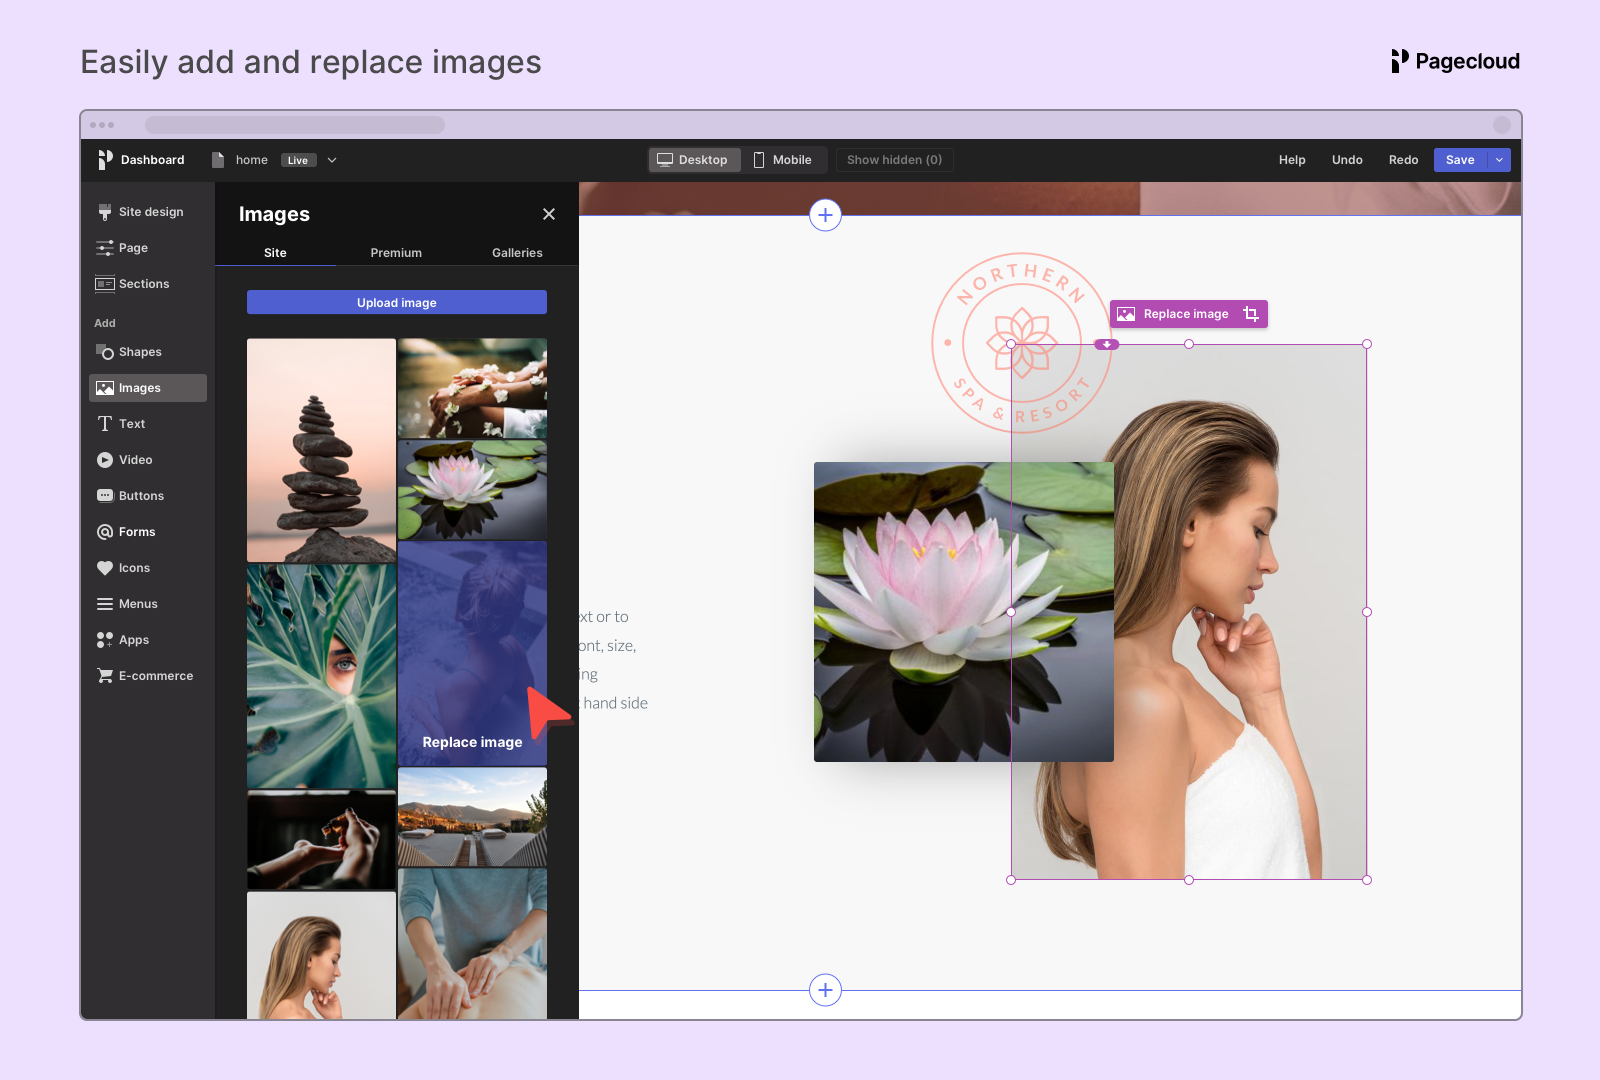 Easily add and replace images on your site. Drag and drop images from your desktop onto your page to add them.